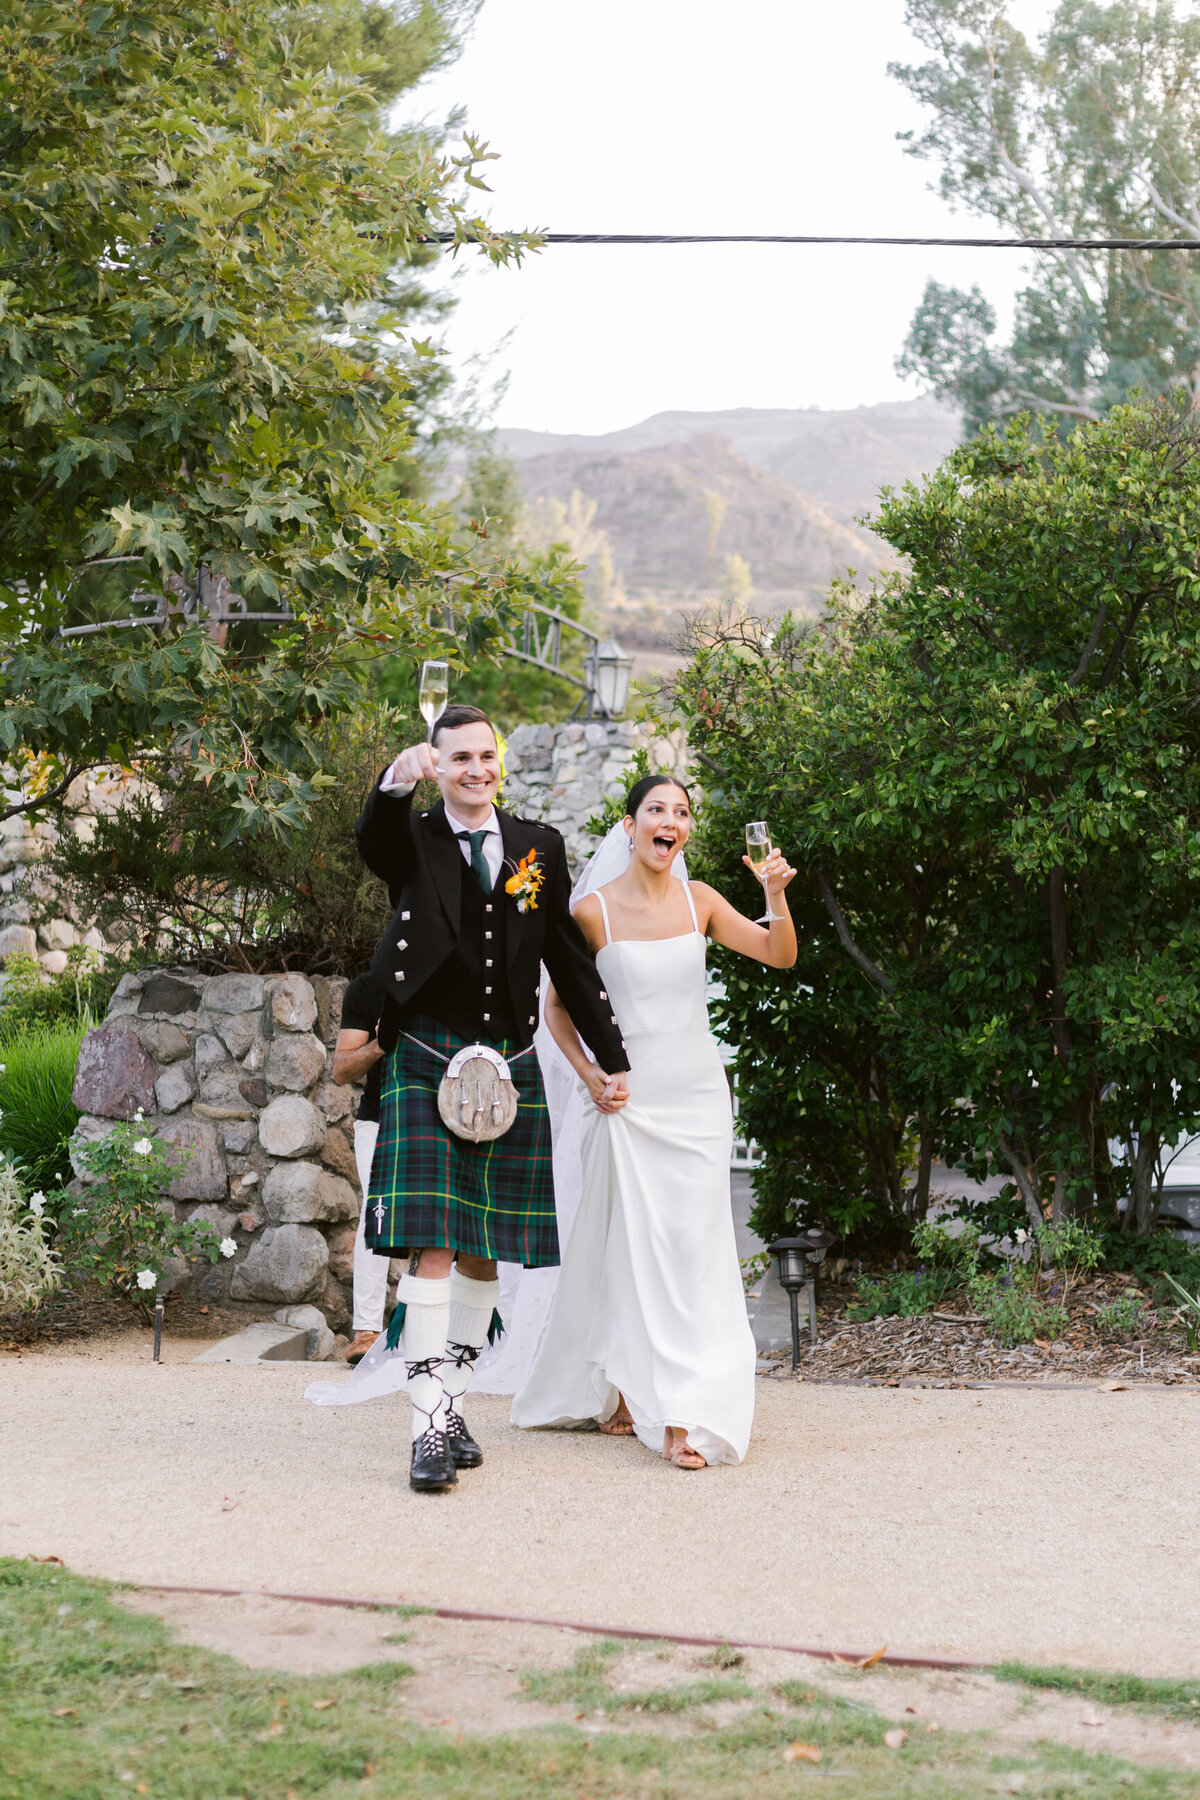 Angelica Marie Photography_Natalie Pirzad and Gordon Stewart Wedding_September 2022_The Lodge at Malibou Lake Wedding_Malibu Wedding Photographer_1520